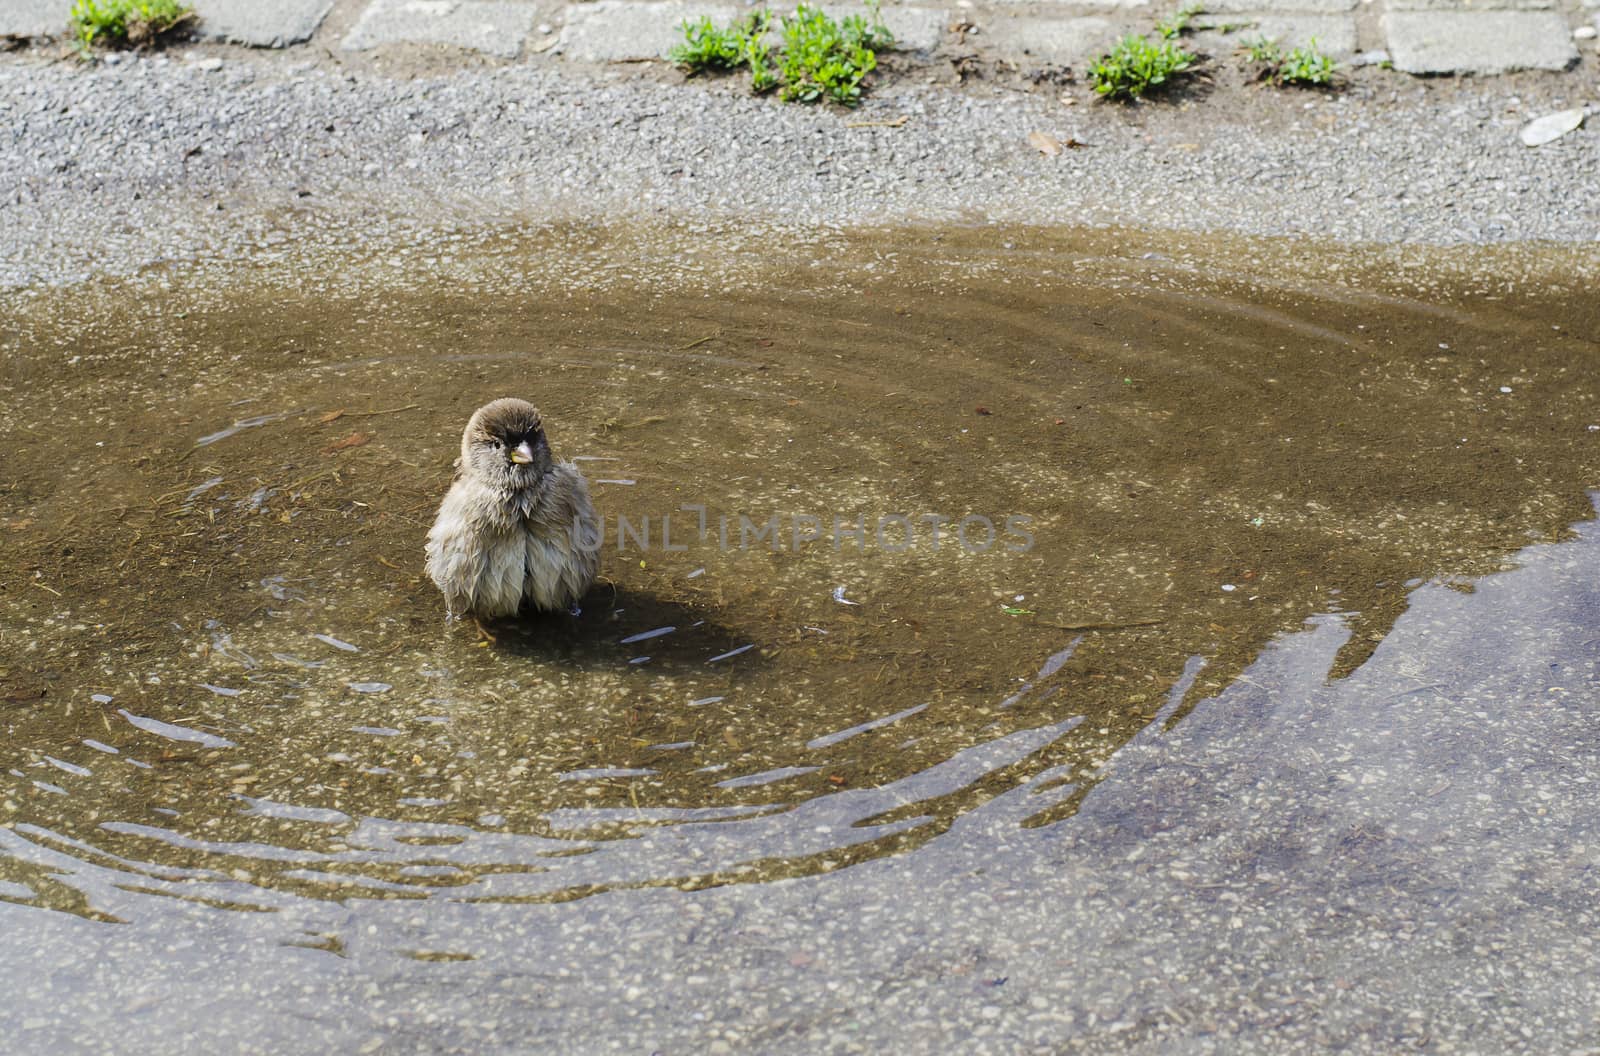 sparrow in a pool of water by Grufnar